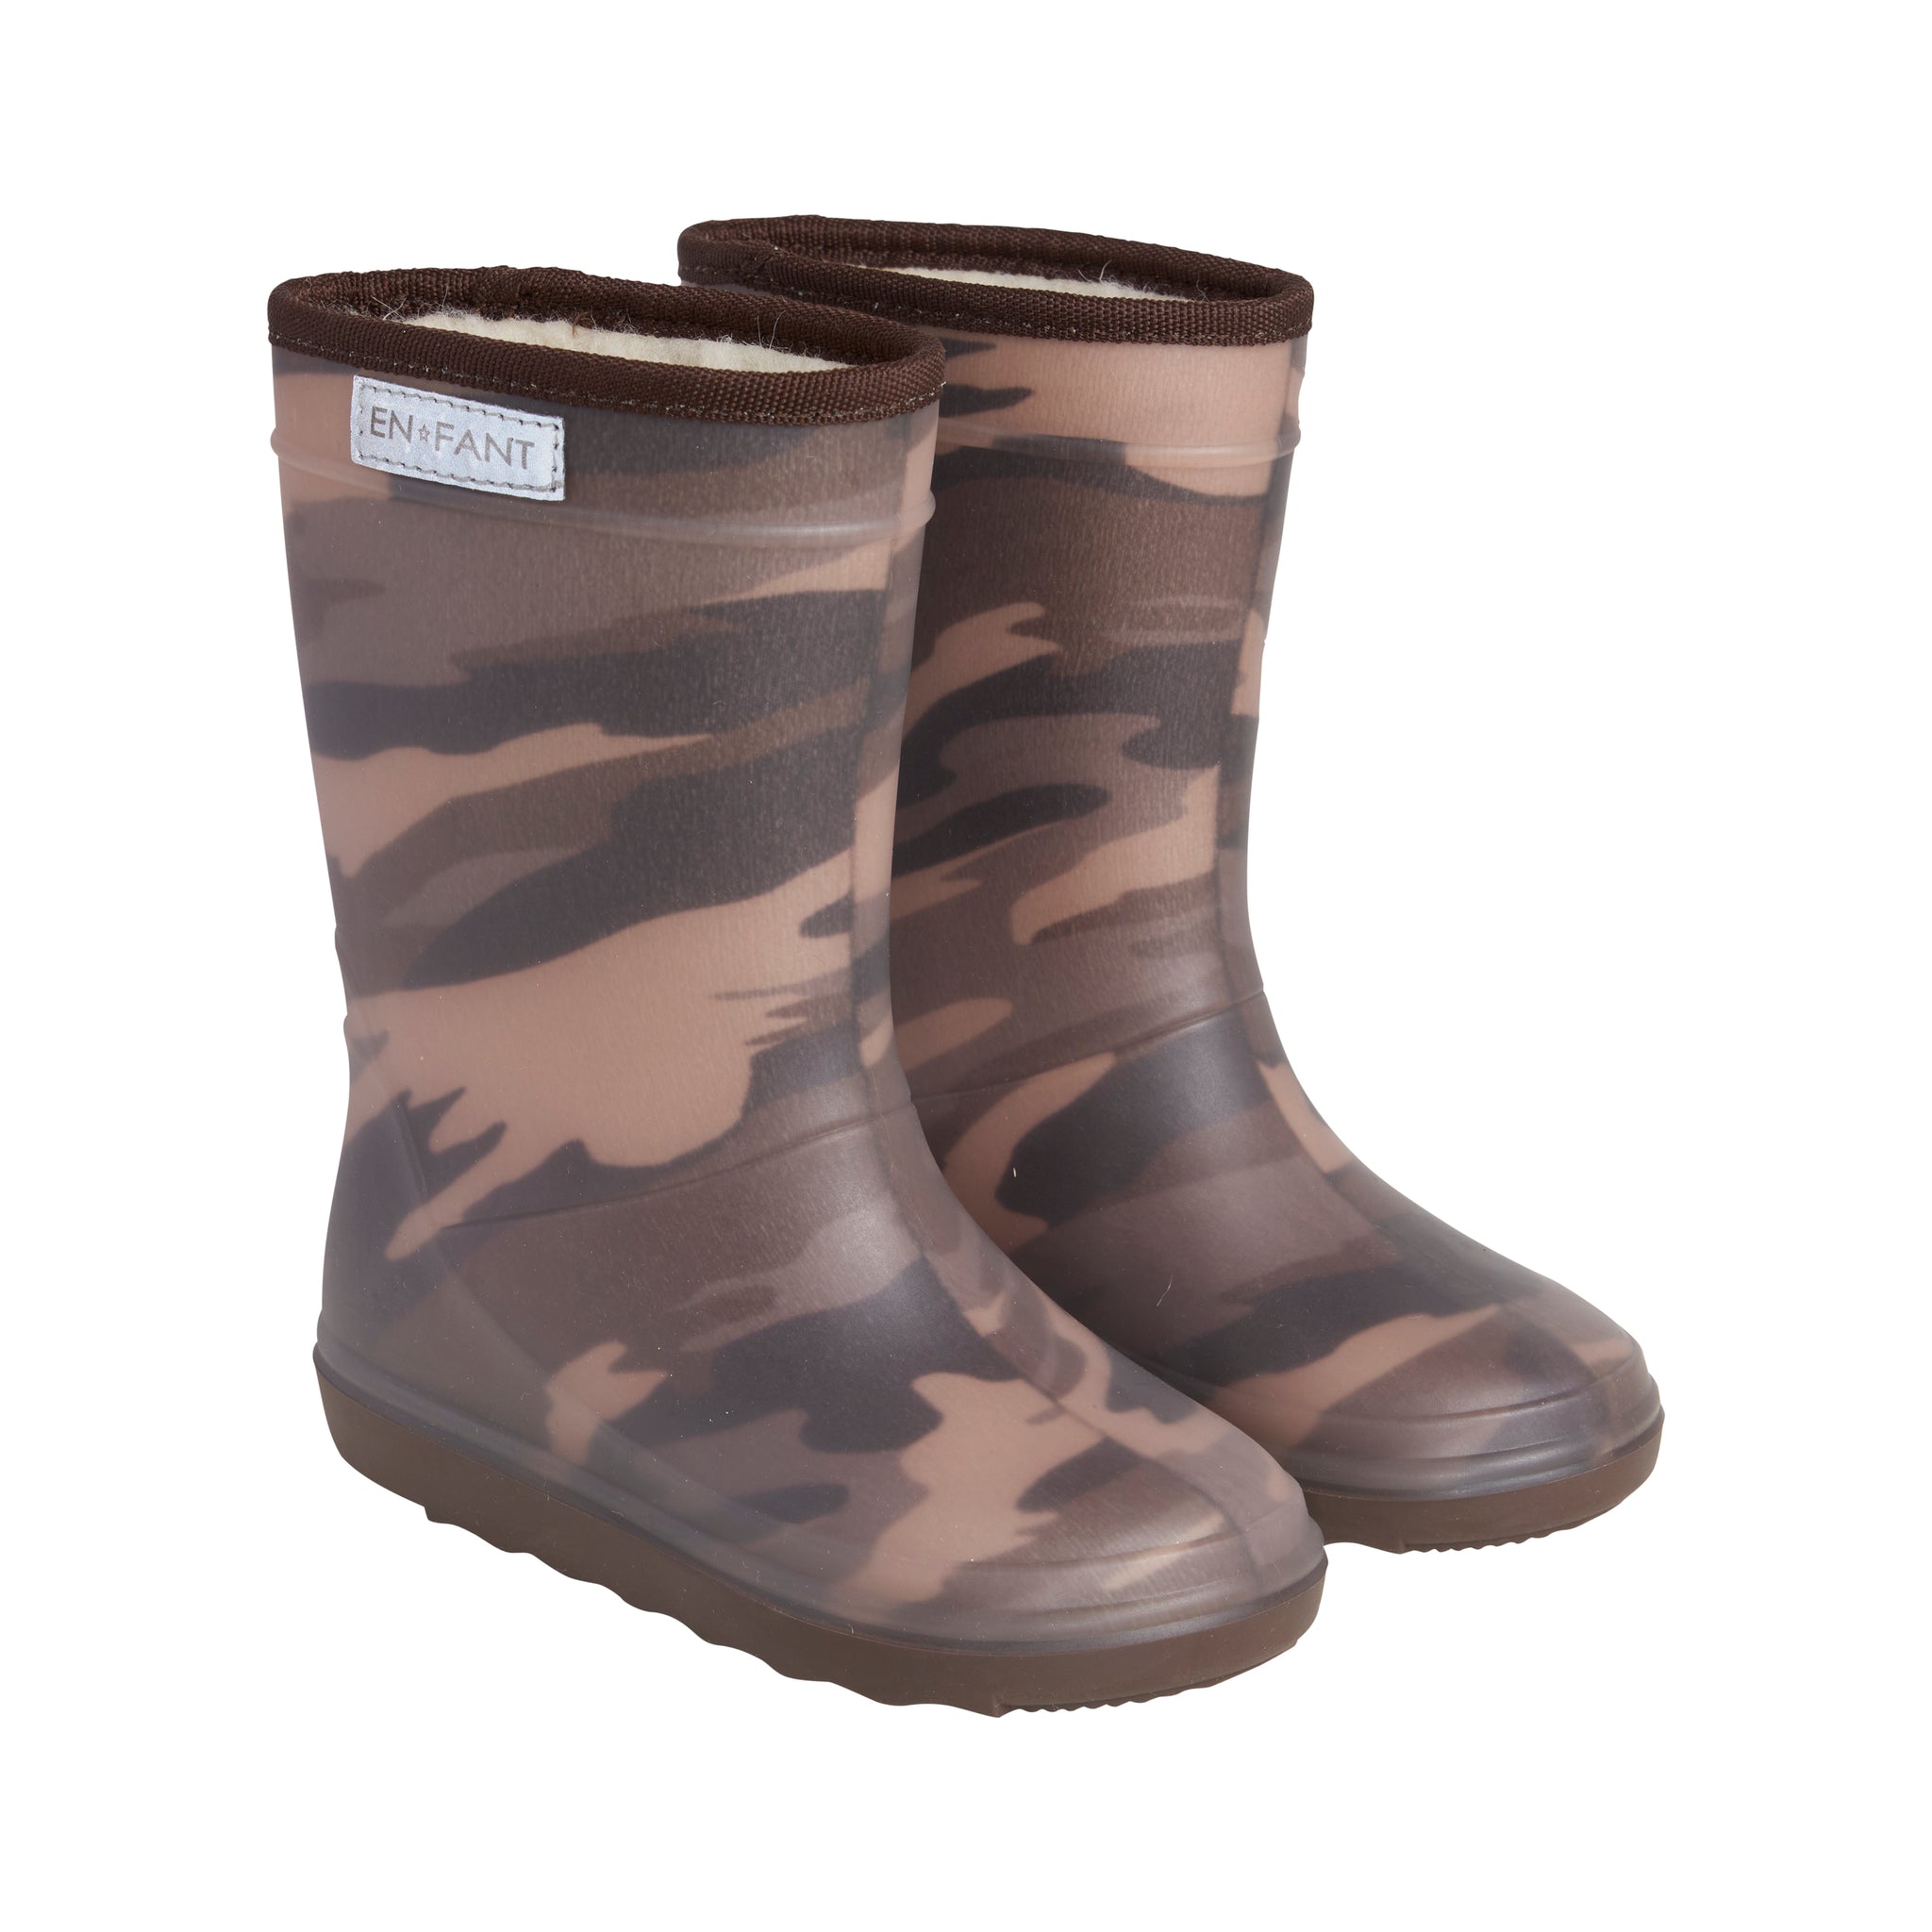 EN FANT - Thermo Boots Print - Dark Olive Camou